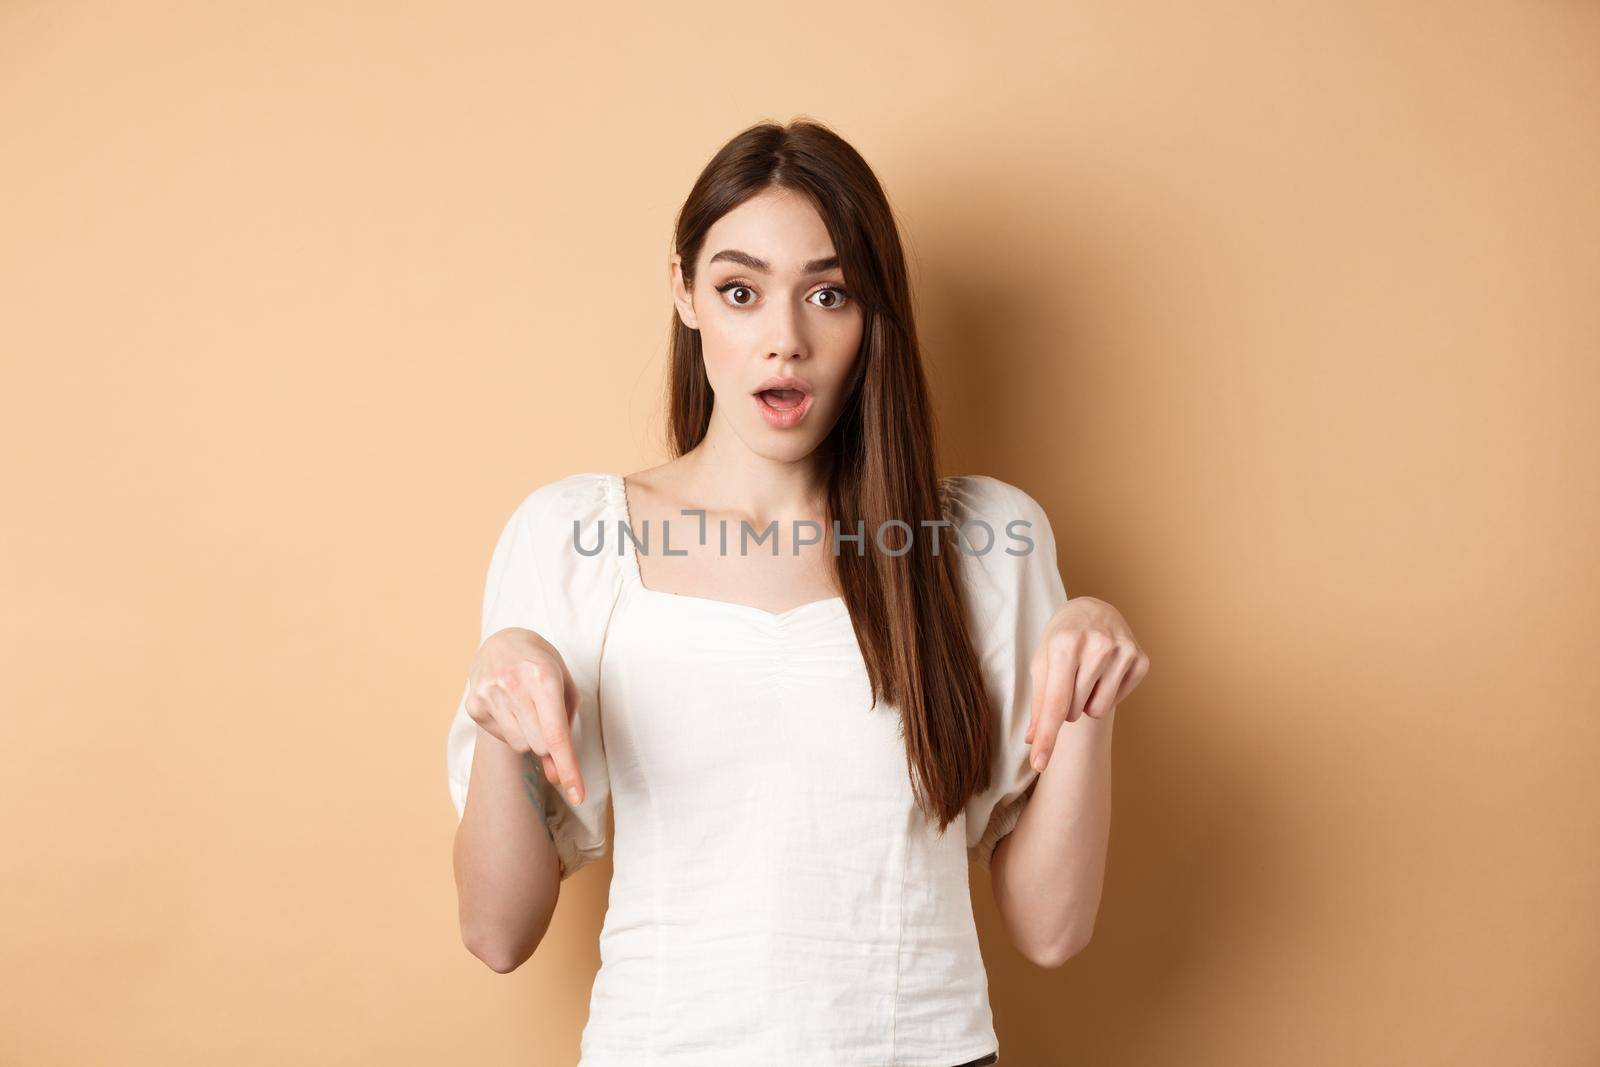 Wow look there. Amazed young woman in white dress pointing fingers down, standing in awe with dropped jaw and popped eyes against beige background.